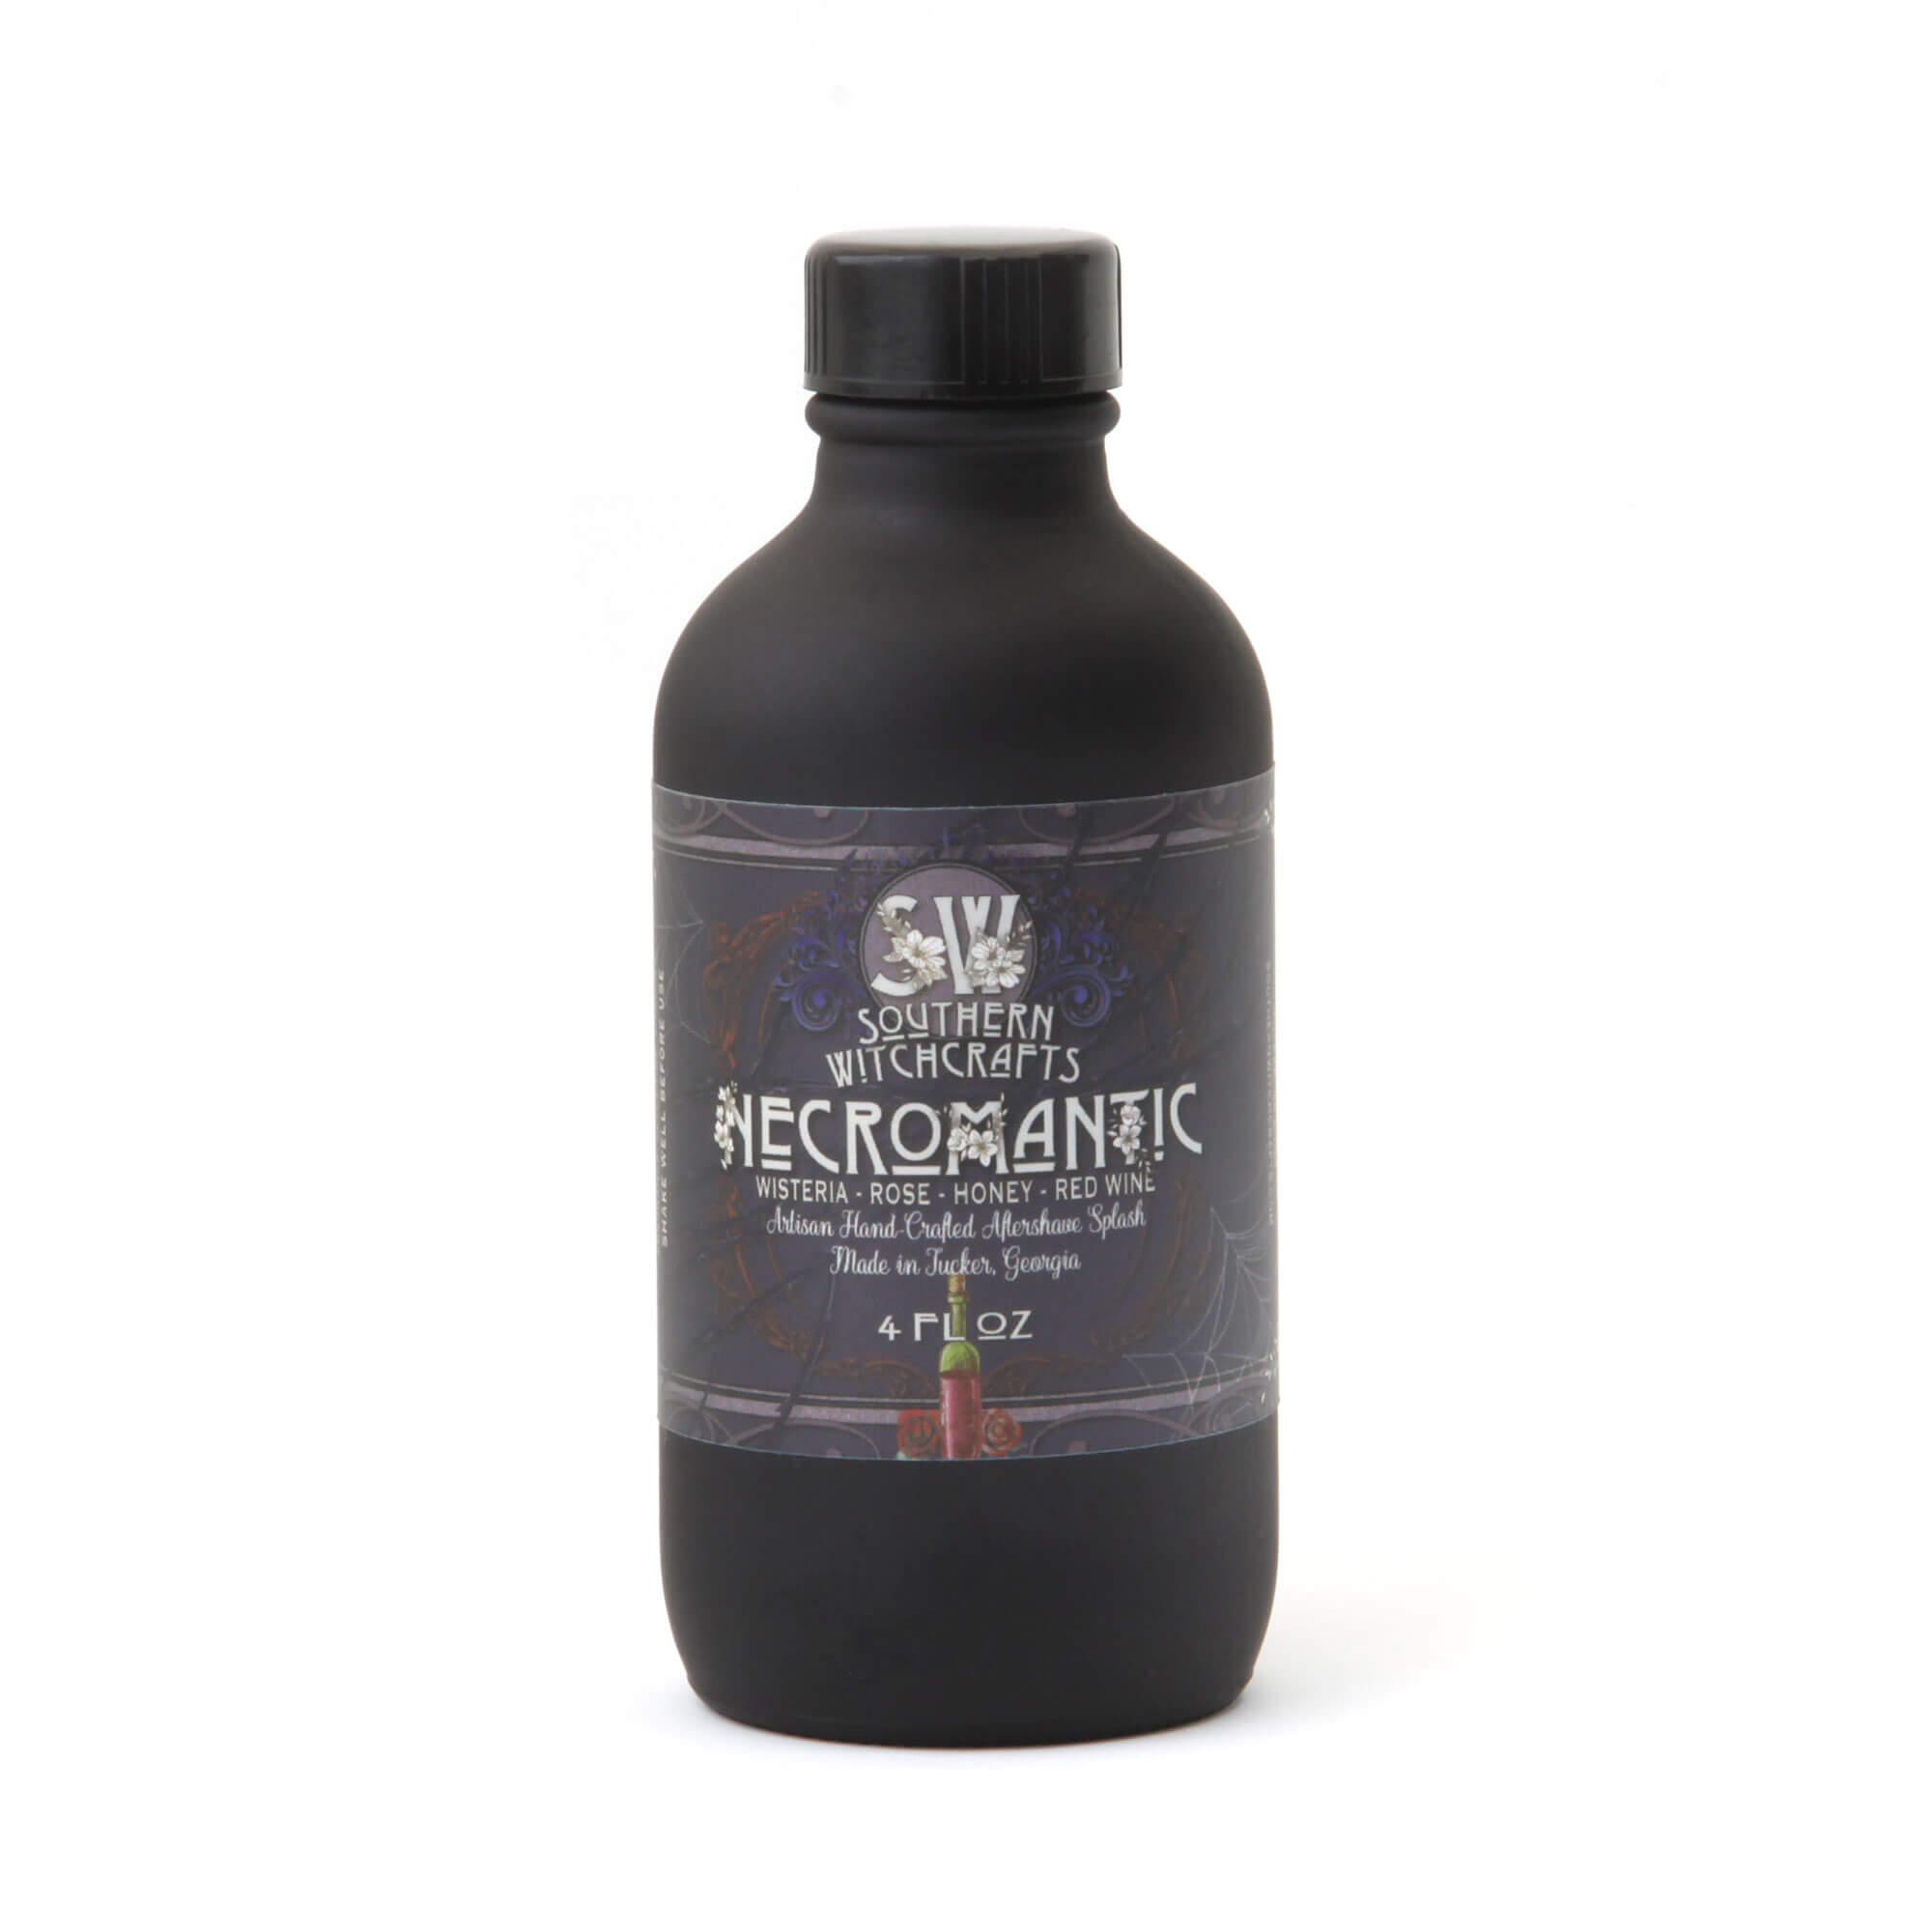 Southern Witchcrafts Necromantic Aftershave Splash